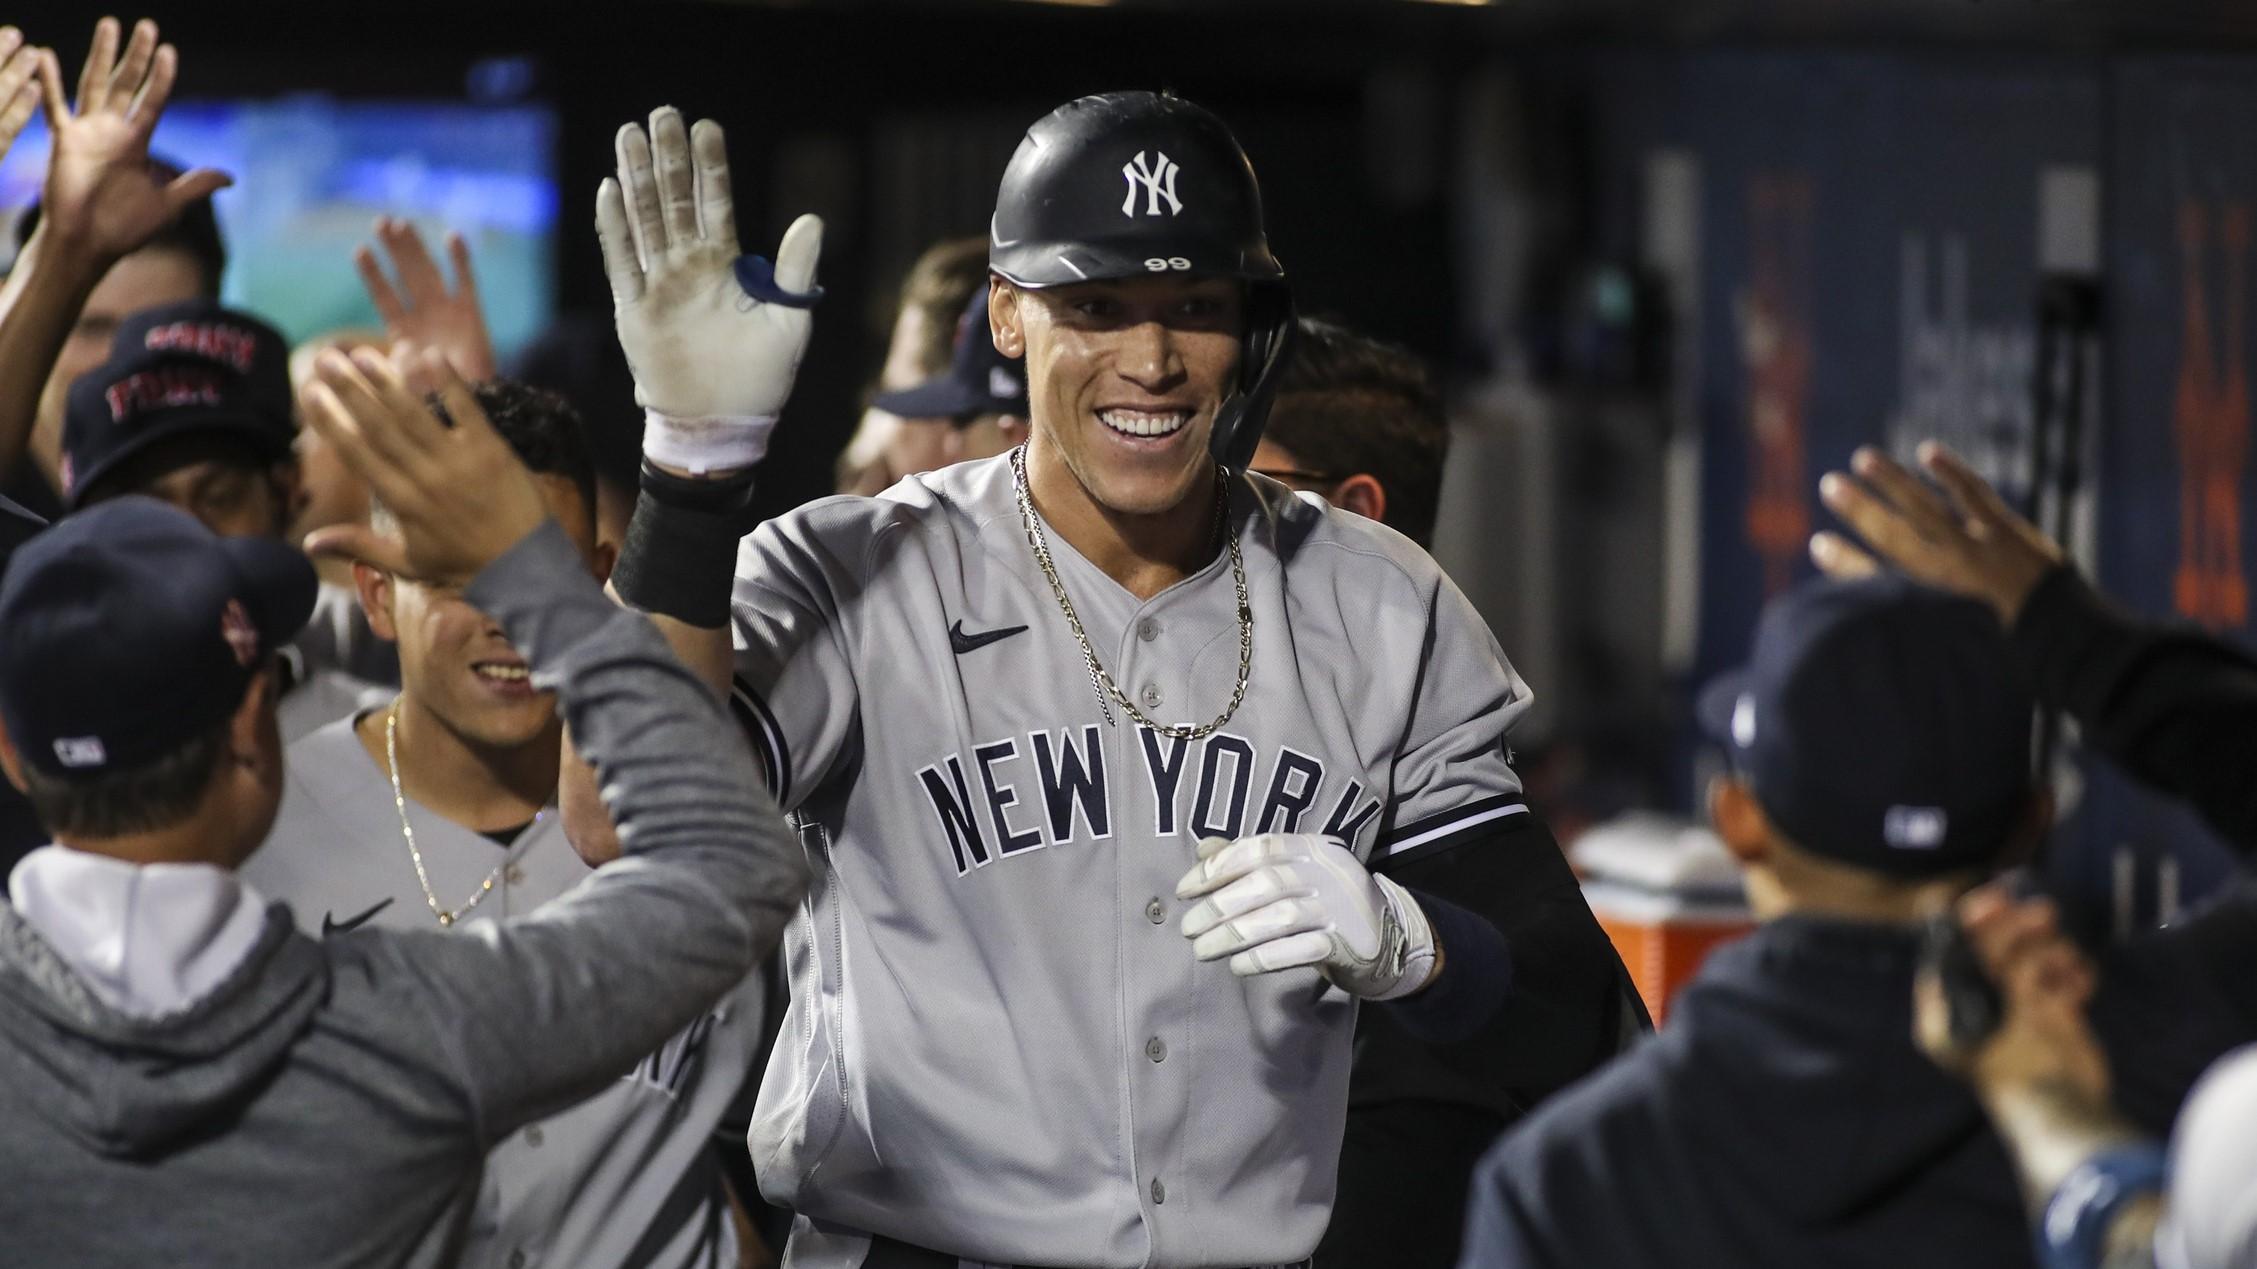 Yankees right fielder Aaron Judge (99) is greeted in the dugout after hitting a solo home run in the second inning against the New York Mets at Citi Field. / Wendell Cruz-USA TODAY Sports